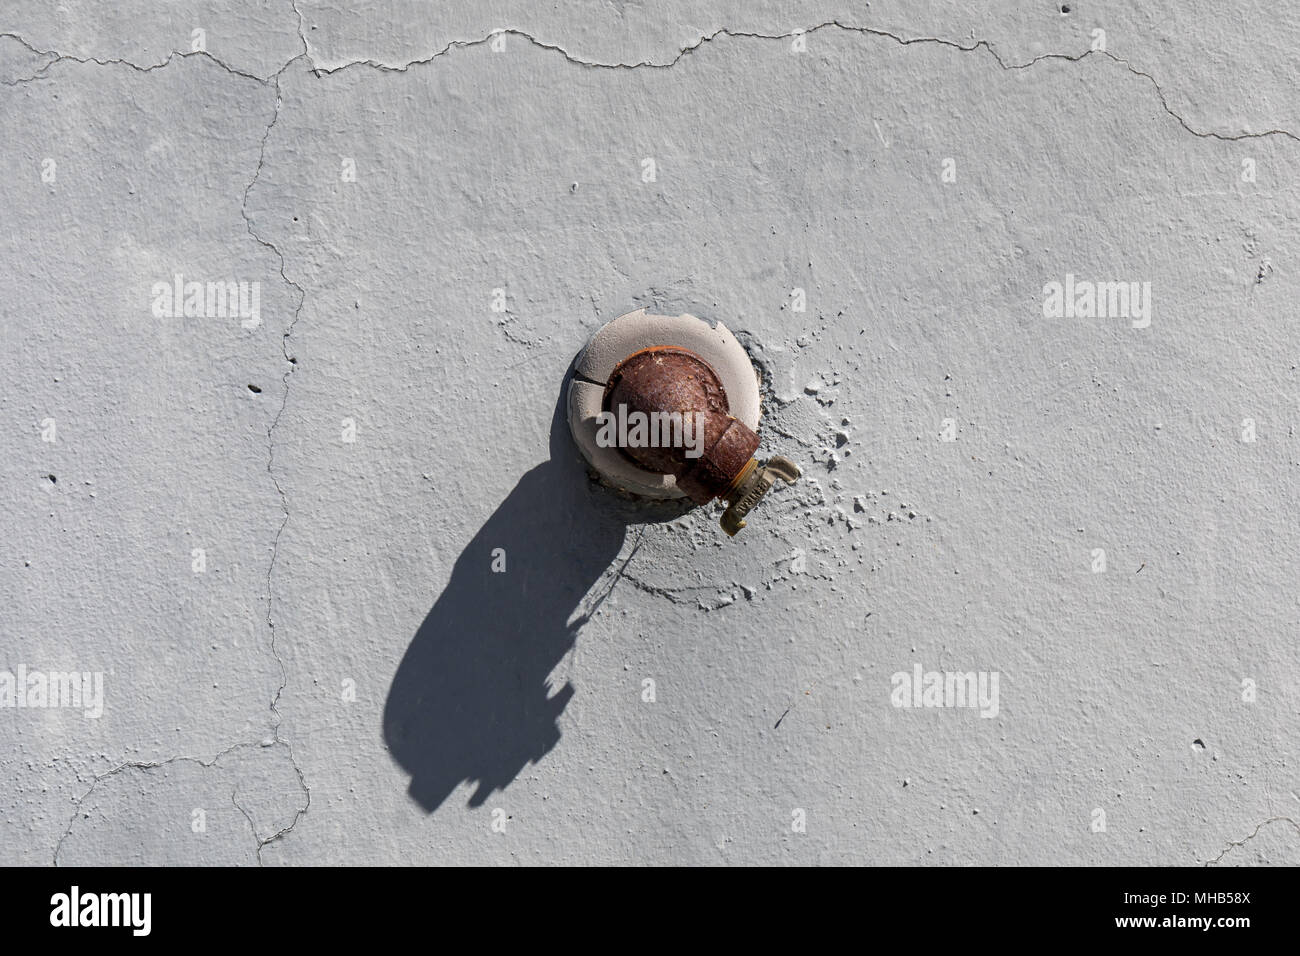 Rusty valve casting a shadow on the wall from which it protrudes Stock Photo